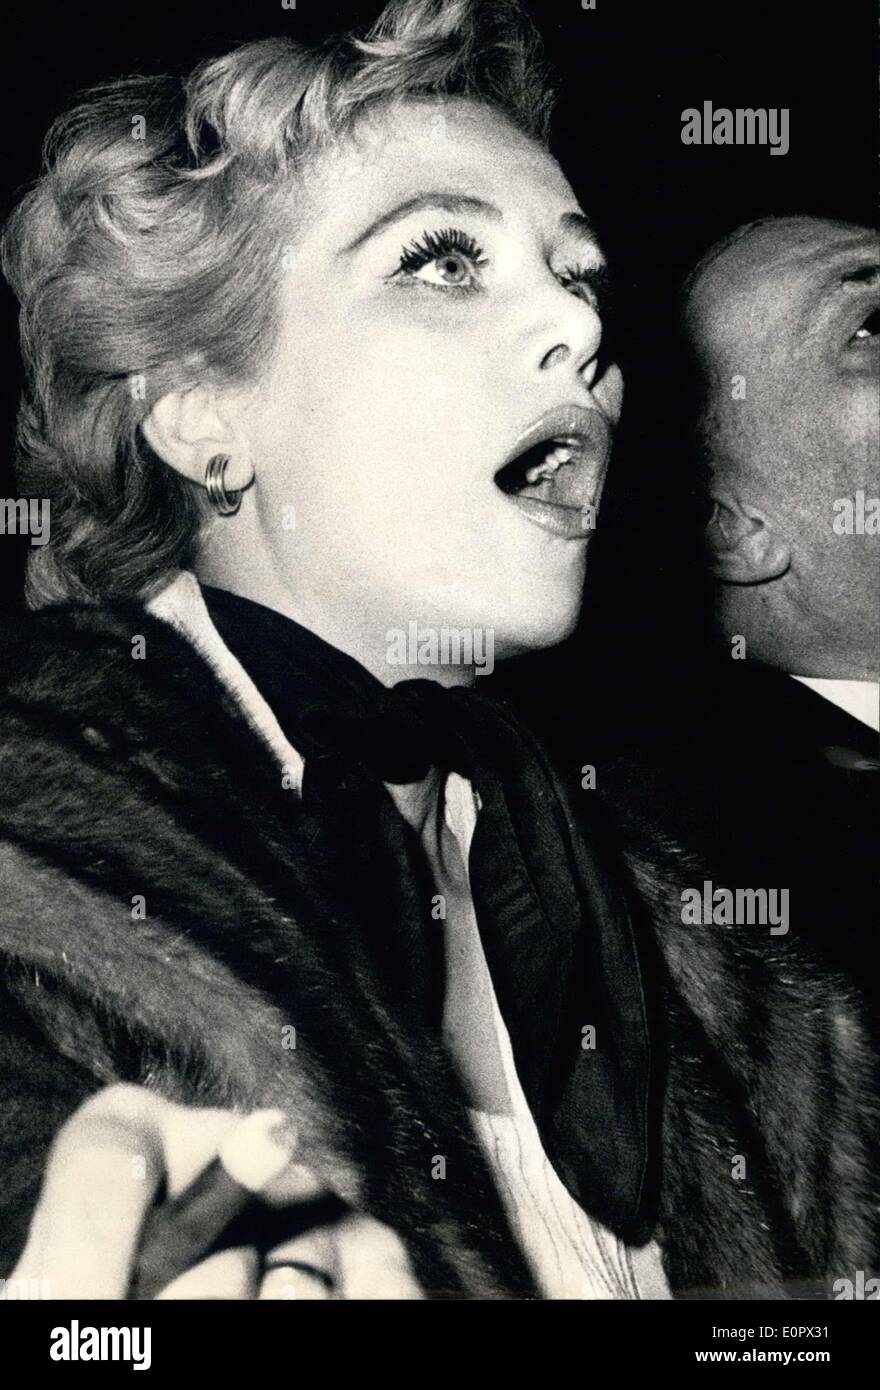 Jan. 26, 1957 - Hildegard Knef, pictured here, was a witness to the defeat of boxer Gerhard Recht at the hands of Yolande Pompey in Berlin's Sport Palace. Stock Photo